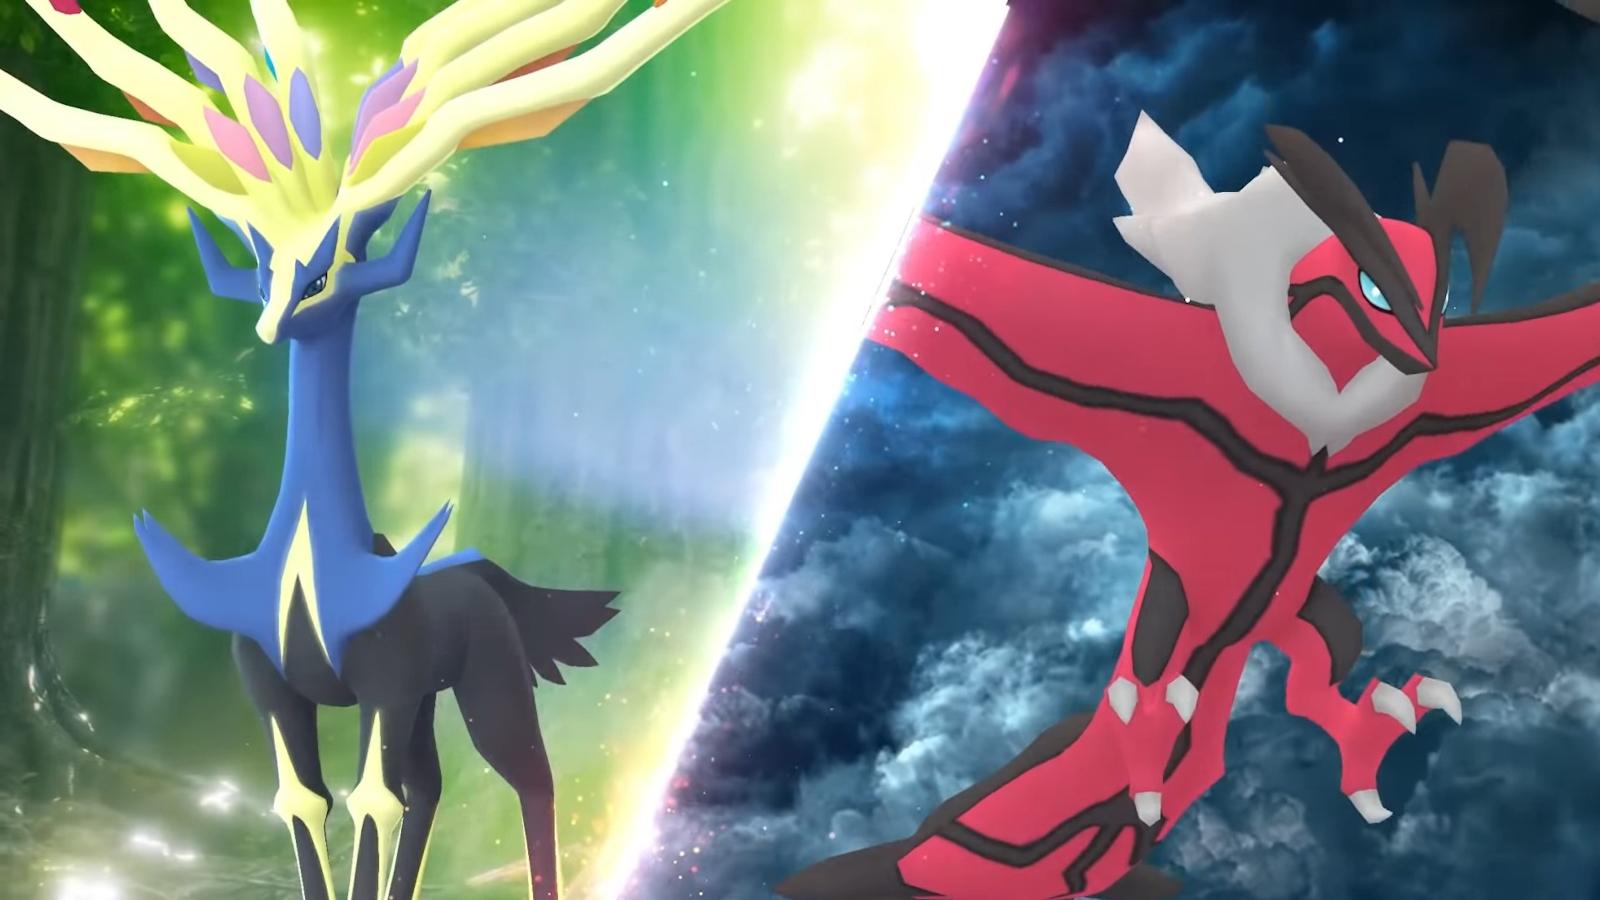 Yveltal and Xerneas legendaries require 20km for candy in Pokemon Go.